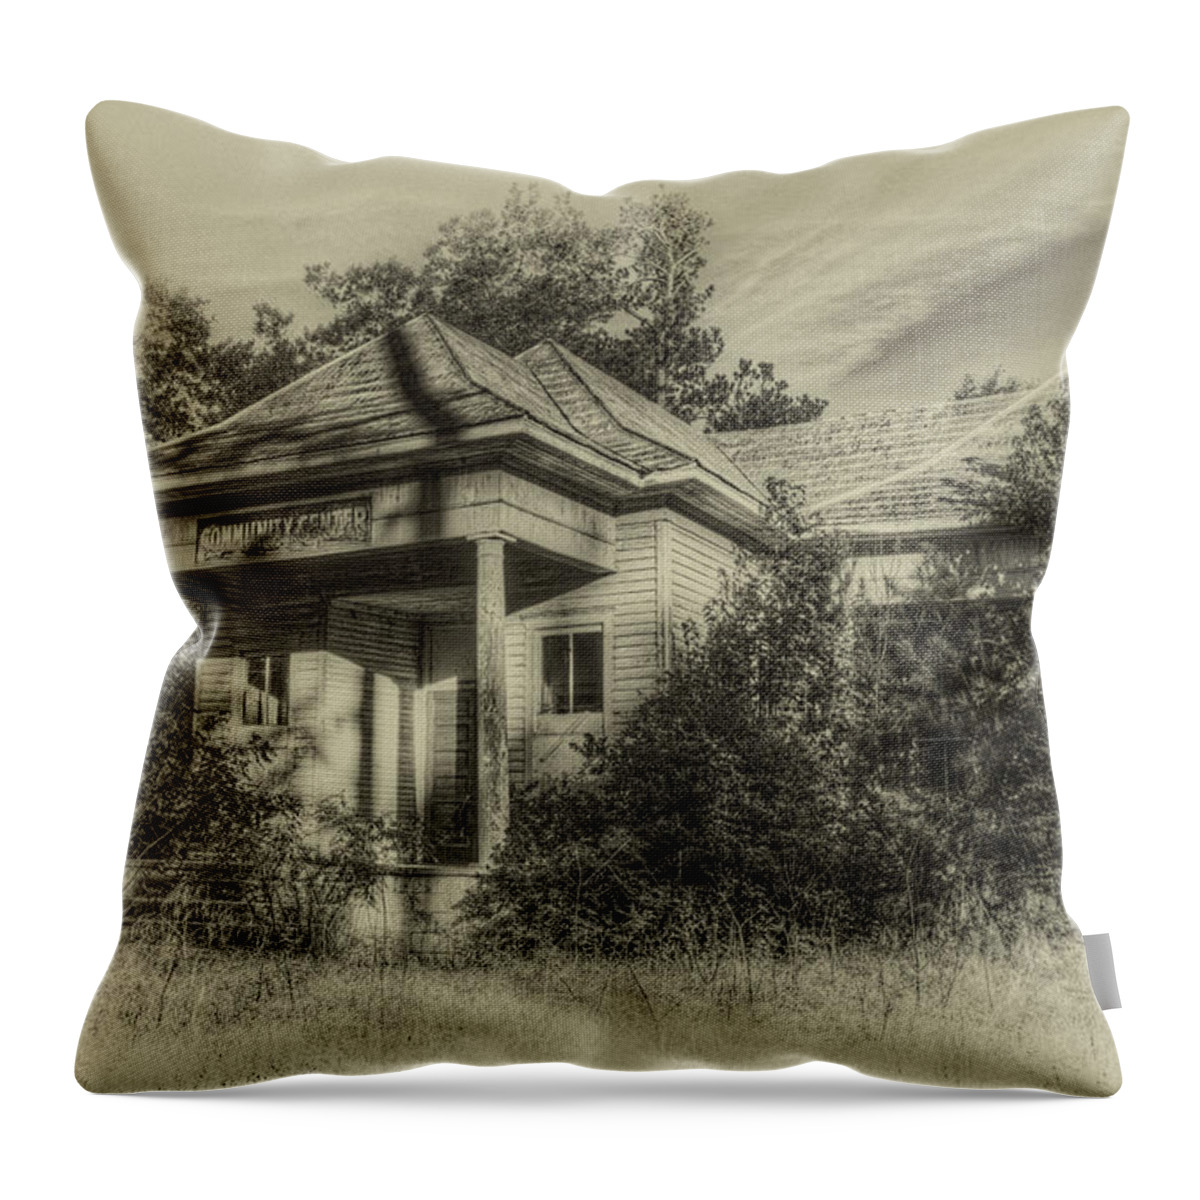 Old Buildings Throw Pillow featuring the photograph Community Center II in Sepia by Harry B Brown